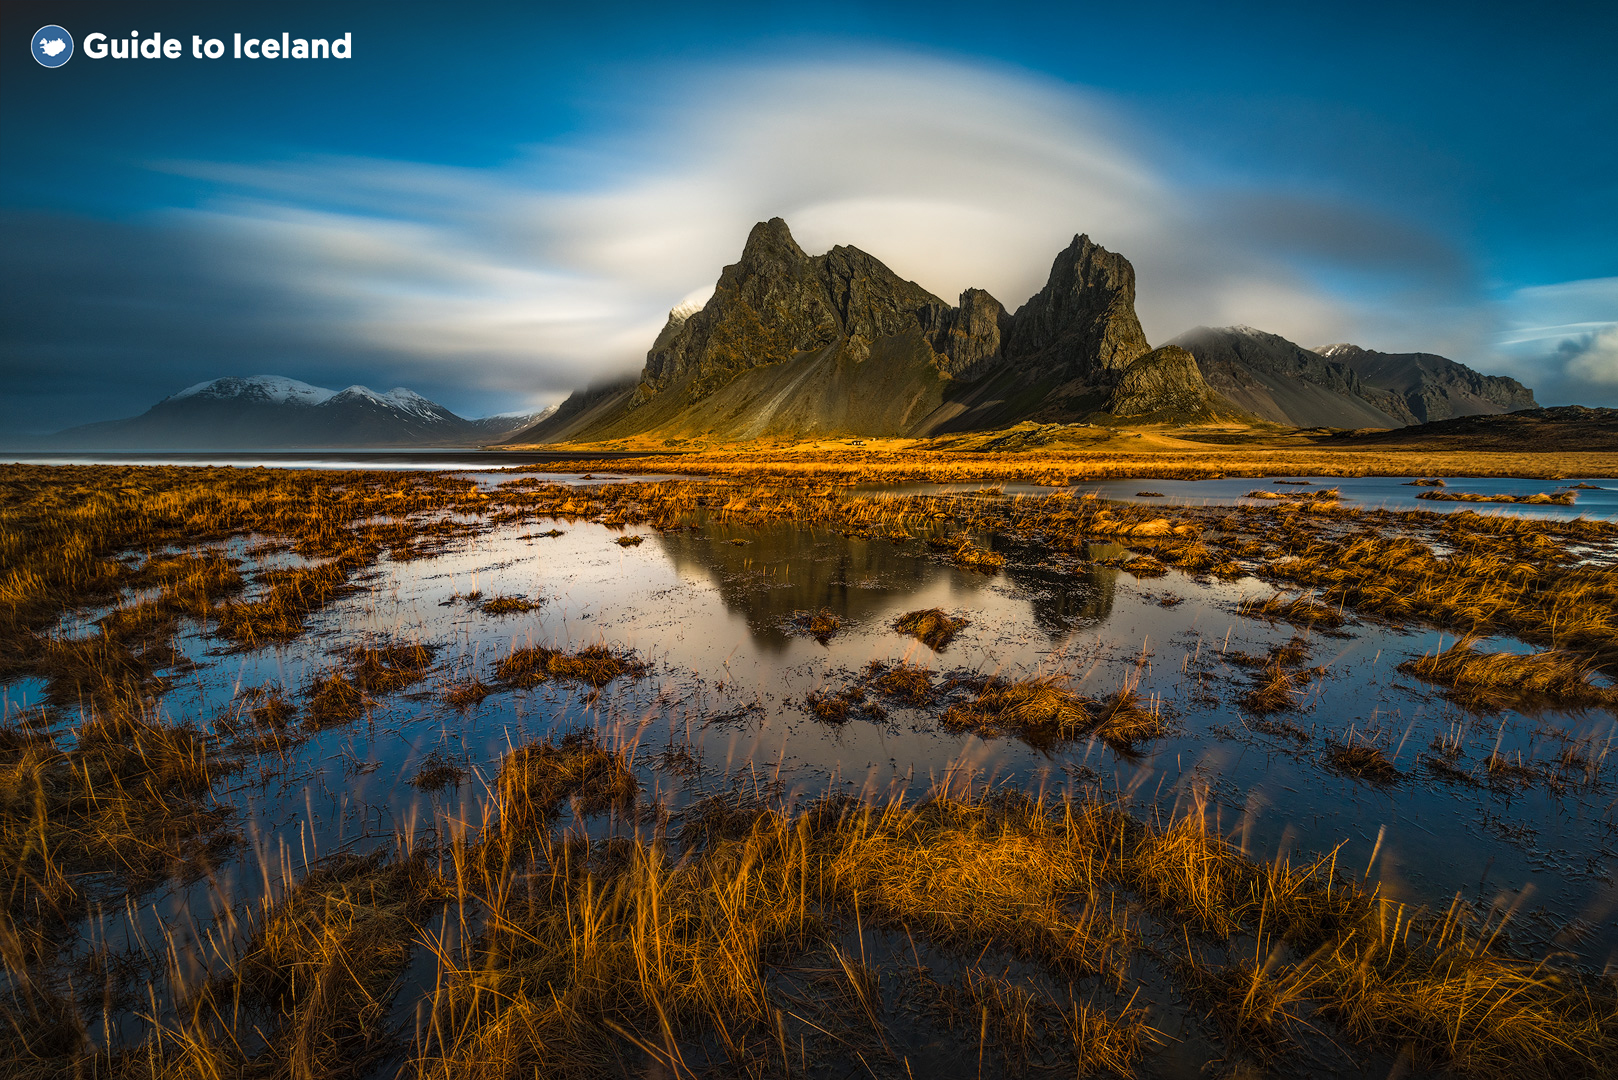 Eystrahorn Mountain in East Iceland overlooking a body of water in summer.